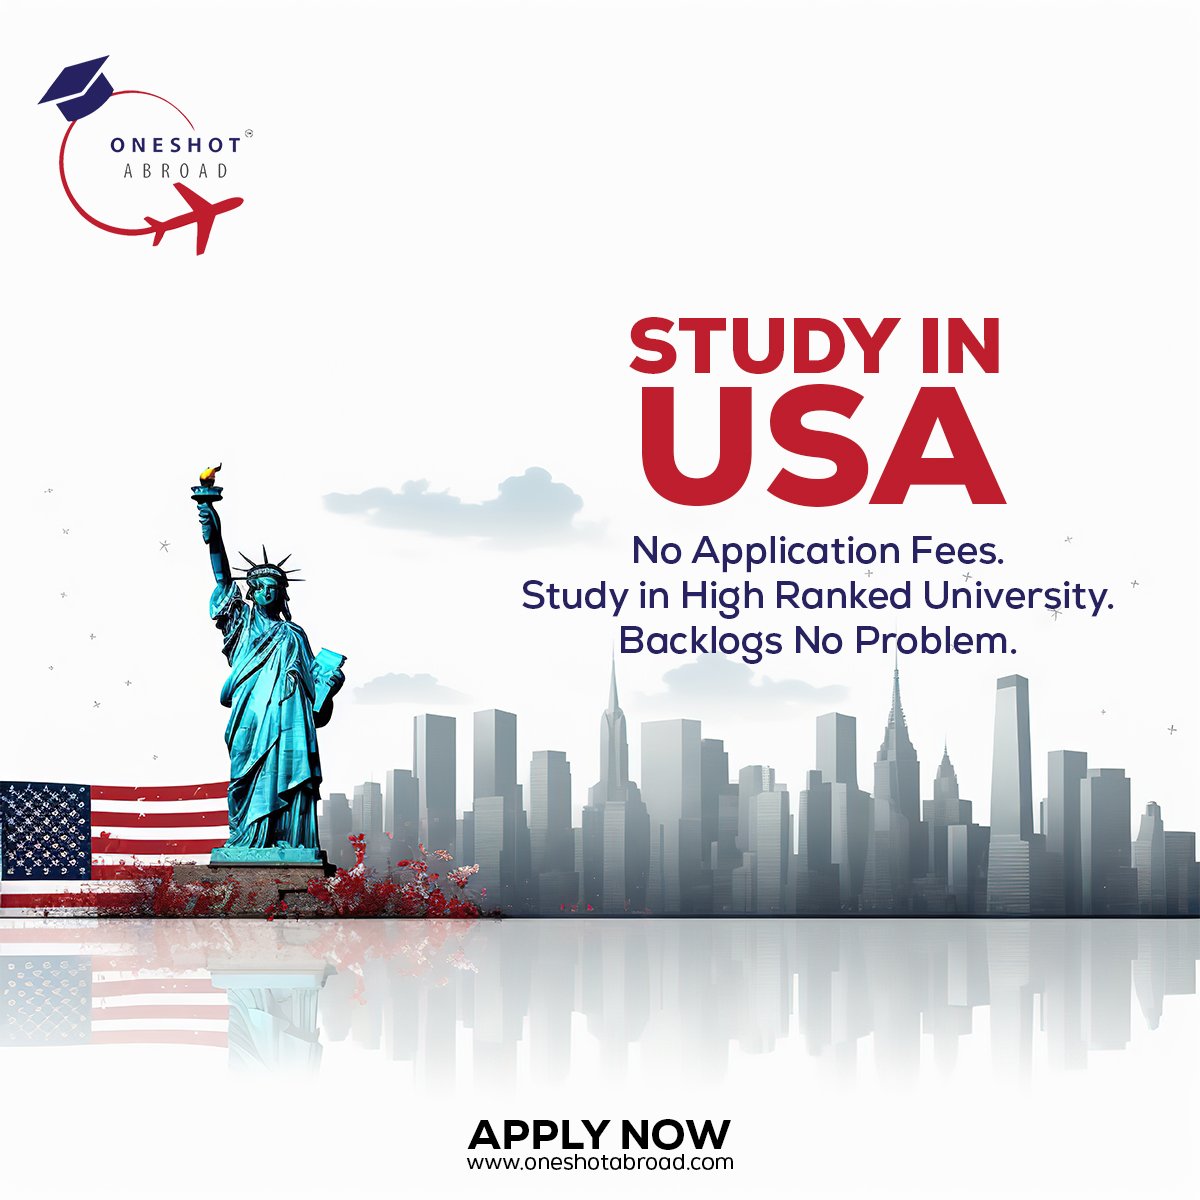 Unlimited Benefits! Immense Academia!

Study in USA!

Admissions Open for 2023-24

Enroll Now @OneShotAbroad
 #studyinuk #studyinusa #studyabroad #expertcounsellor #expertcounselling #studyabroadconsultants #education #usastudy #usa #educationloan #ielts #pte #academia